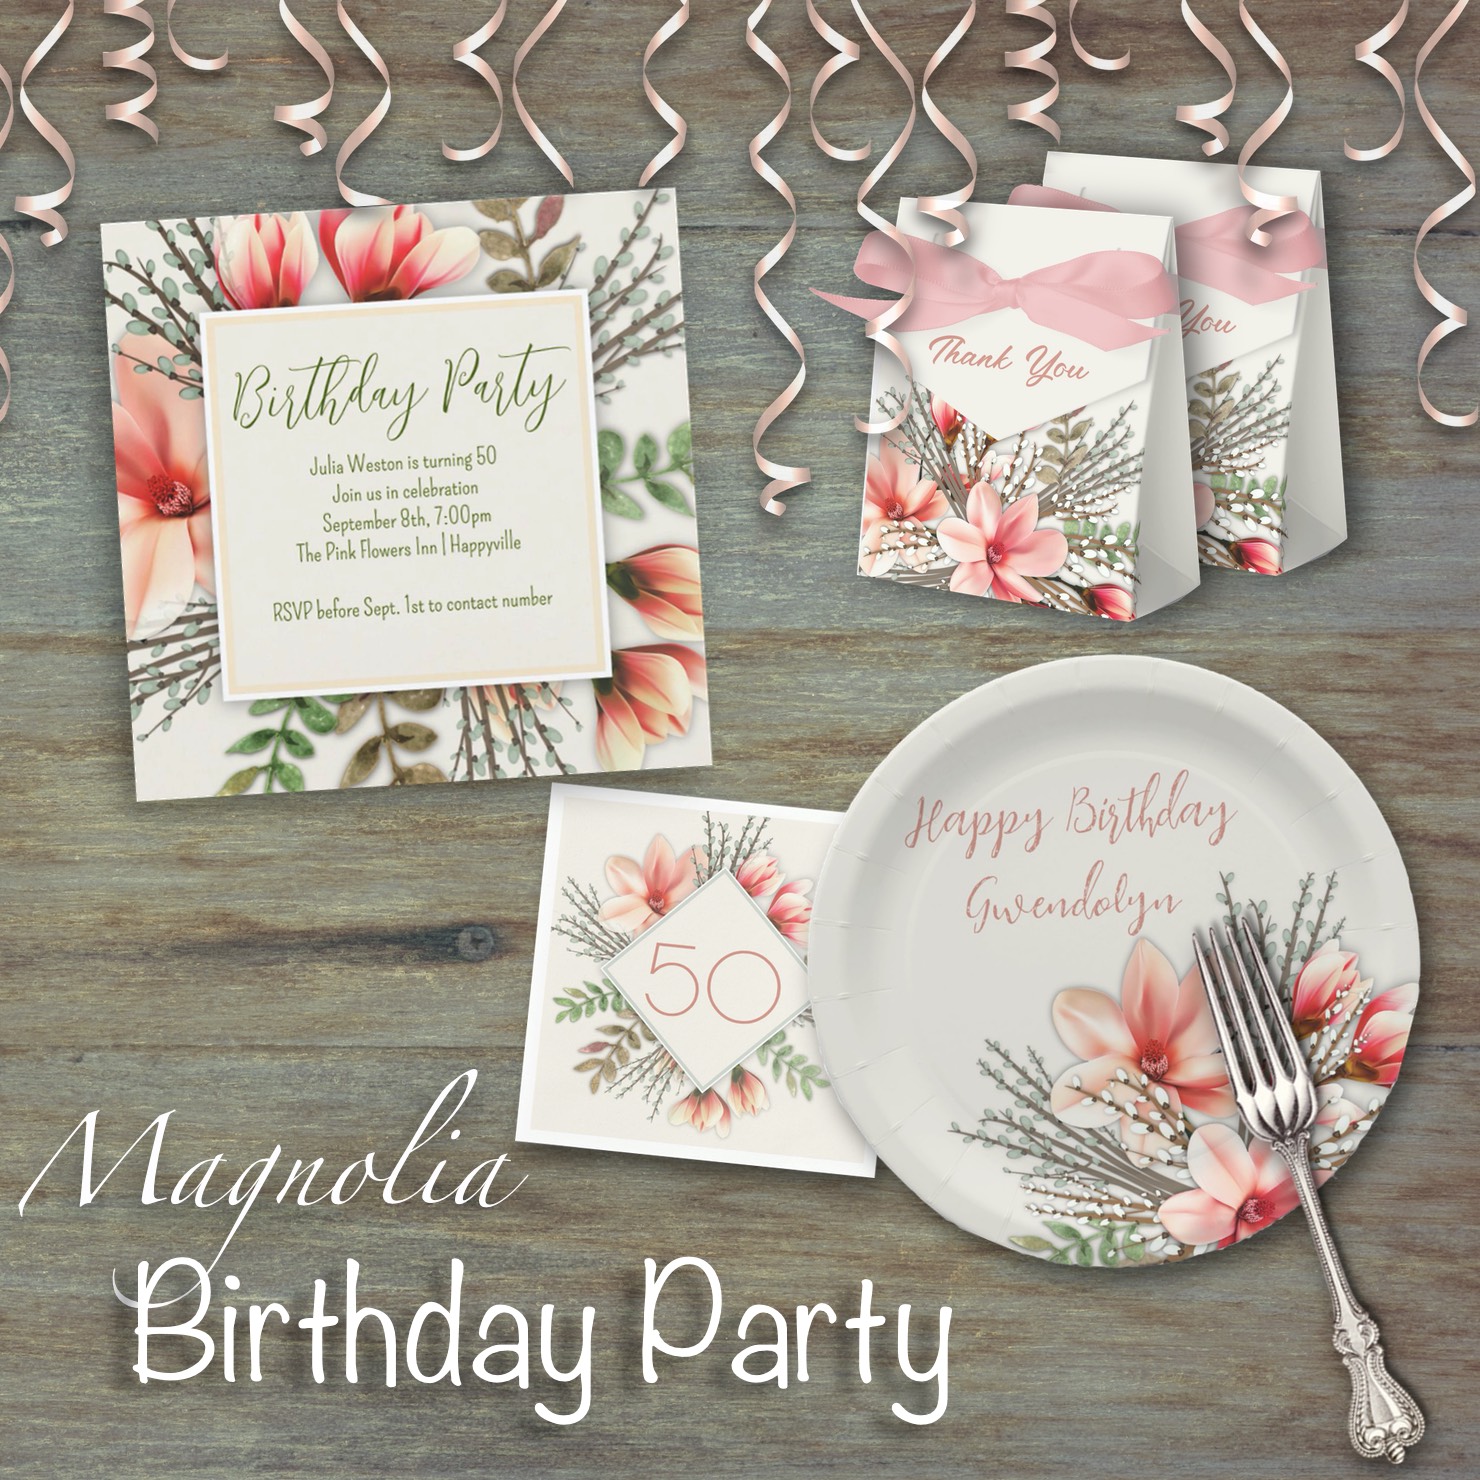 Magnolia flowers birthday party invitations and paper goods.